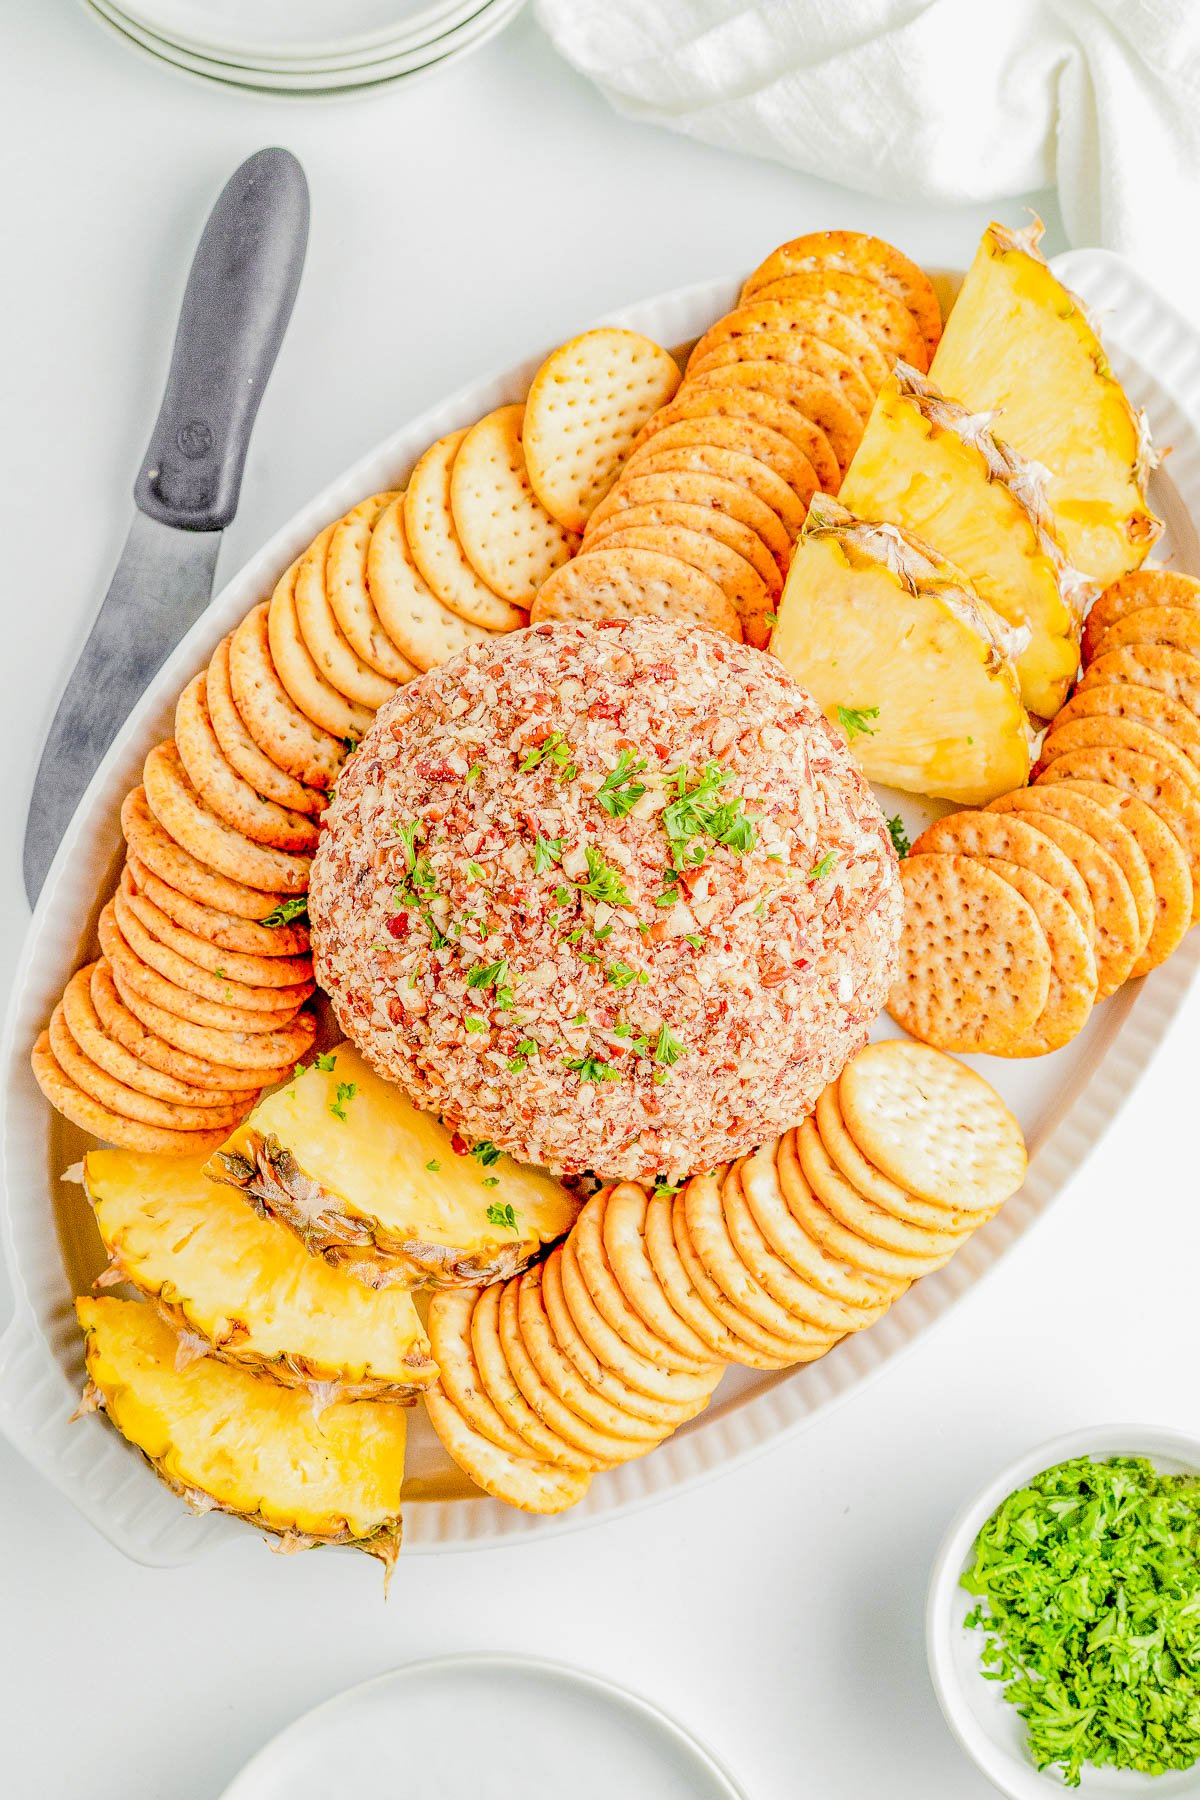 Pineapple Cheese Ball - An EASY holiday appetizer recipe that's a party favorite! Made with tangy cream cheese, juicy pineapple, green bell peppers, green onions, and plenty of nuts for lovely crunch and texture! It's a super simple dump-and-stir recipe with no baking, no cooking, no mixer, and no fuss! Serve this at Christmas parties, New Year's Eve, Super Bowl, and any time you need a guaranteed winner! 